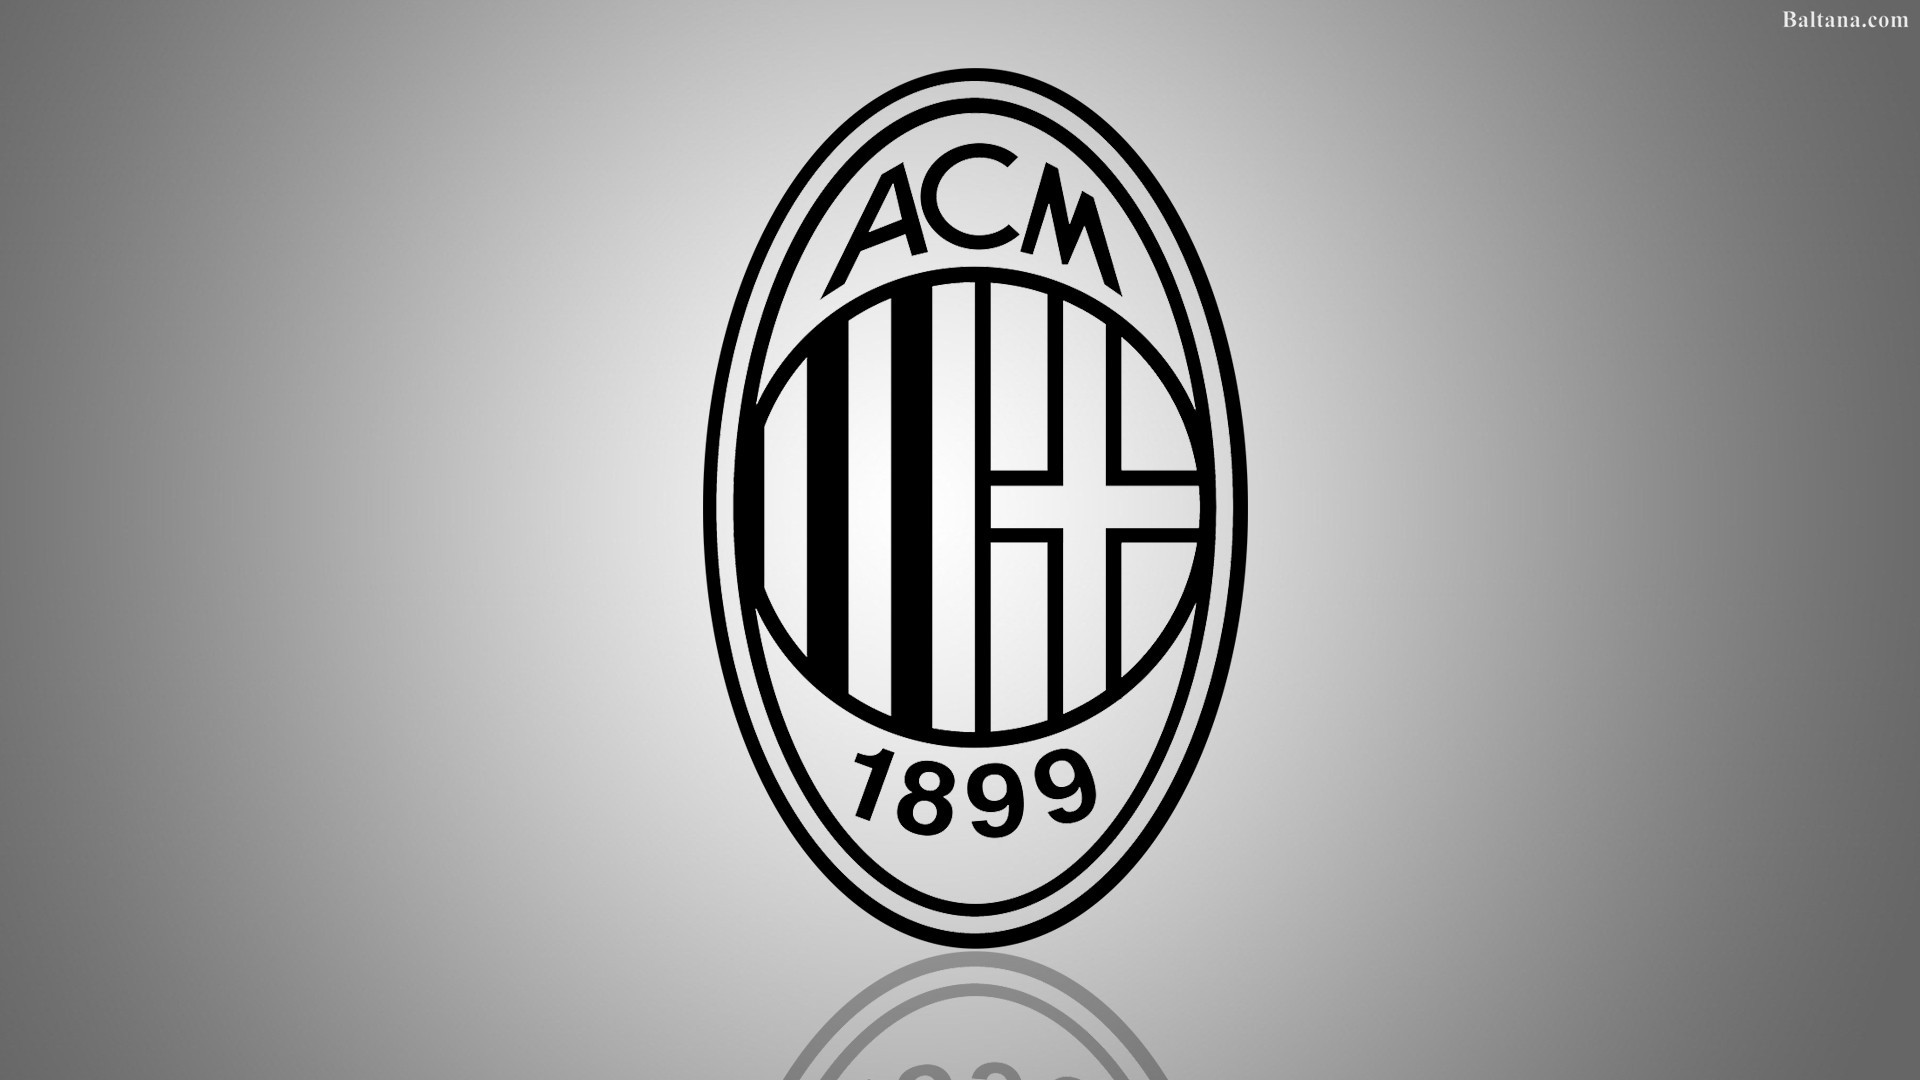 AC Milan Wallpaper For Mac Backgrounds with high-resolution 1920x1080 pixel. You can use this wallpaper for your Desktop Computers, Mac Screensavers, Windows Backgrounds, iPhone Wallpapers, Tablet or Android Lock screen and another Mobile device